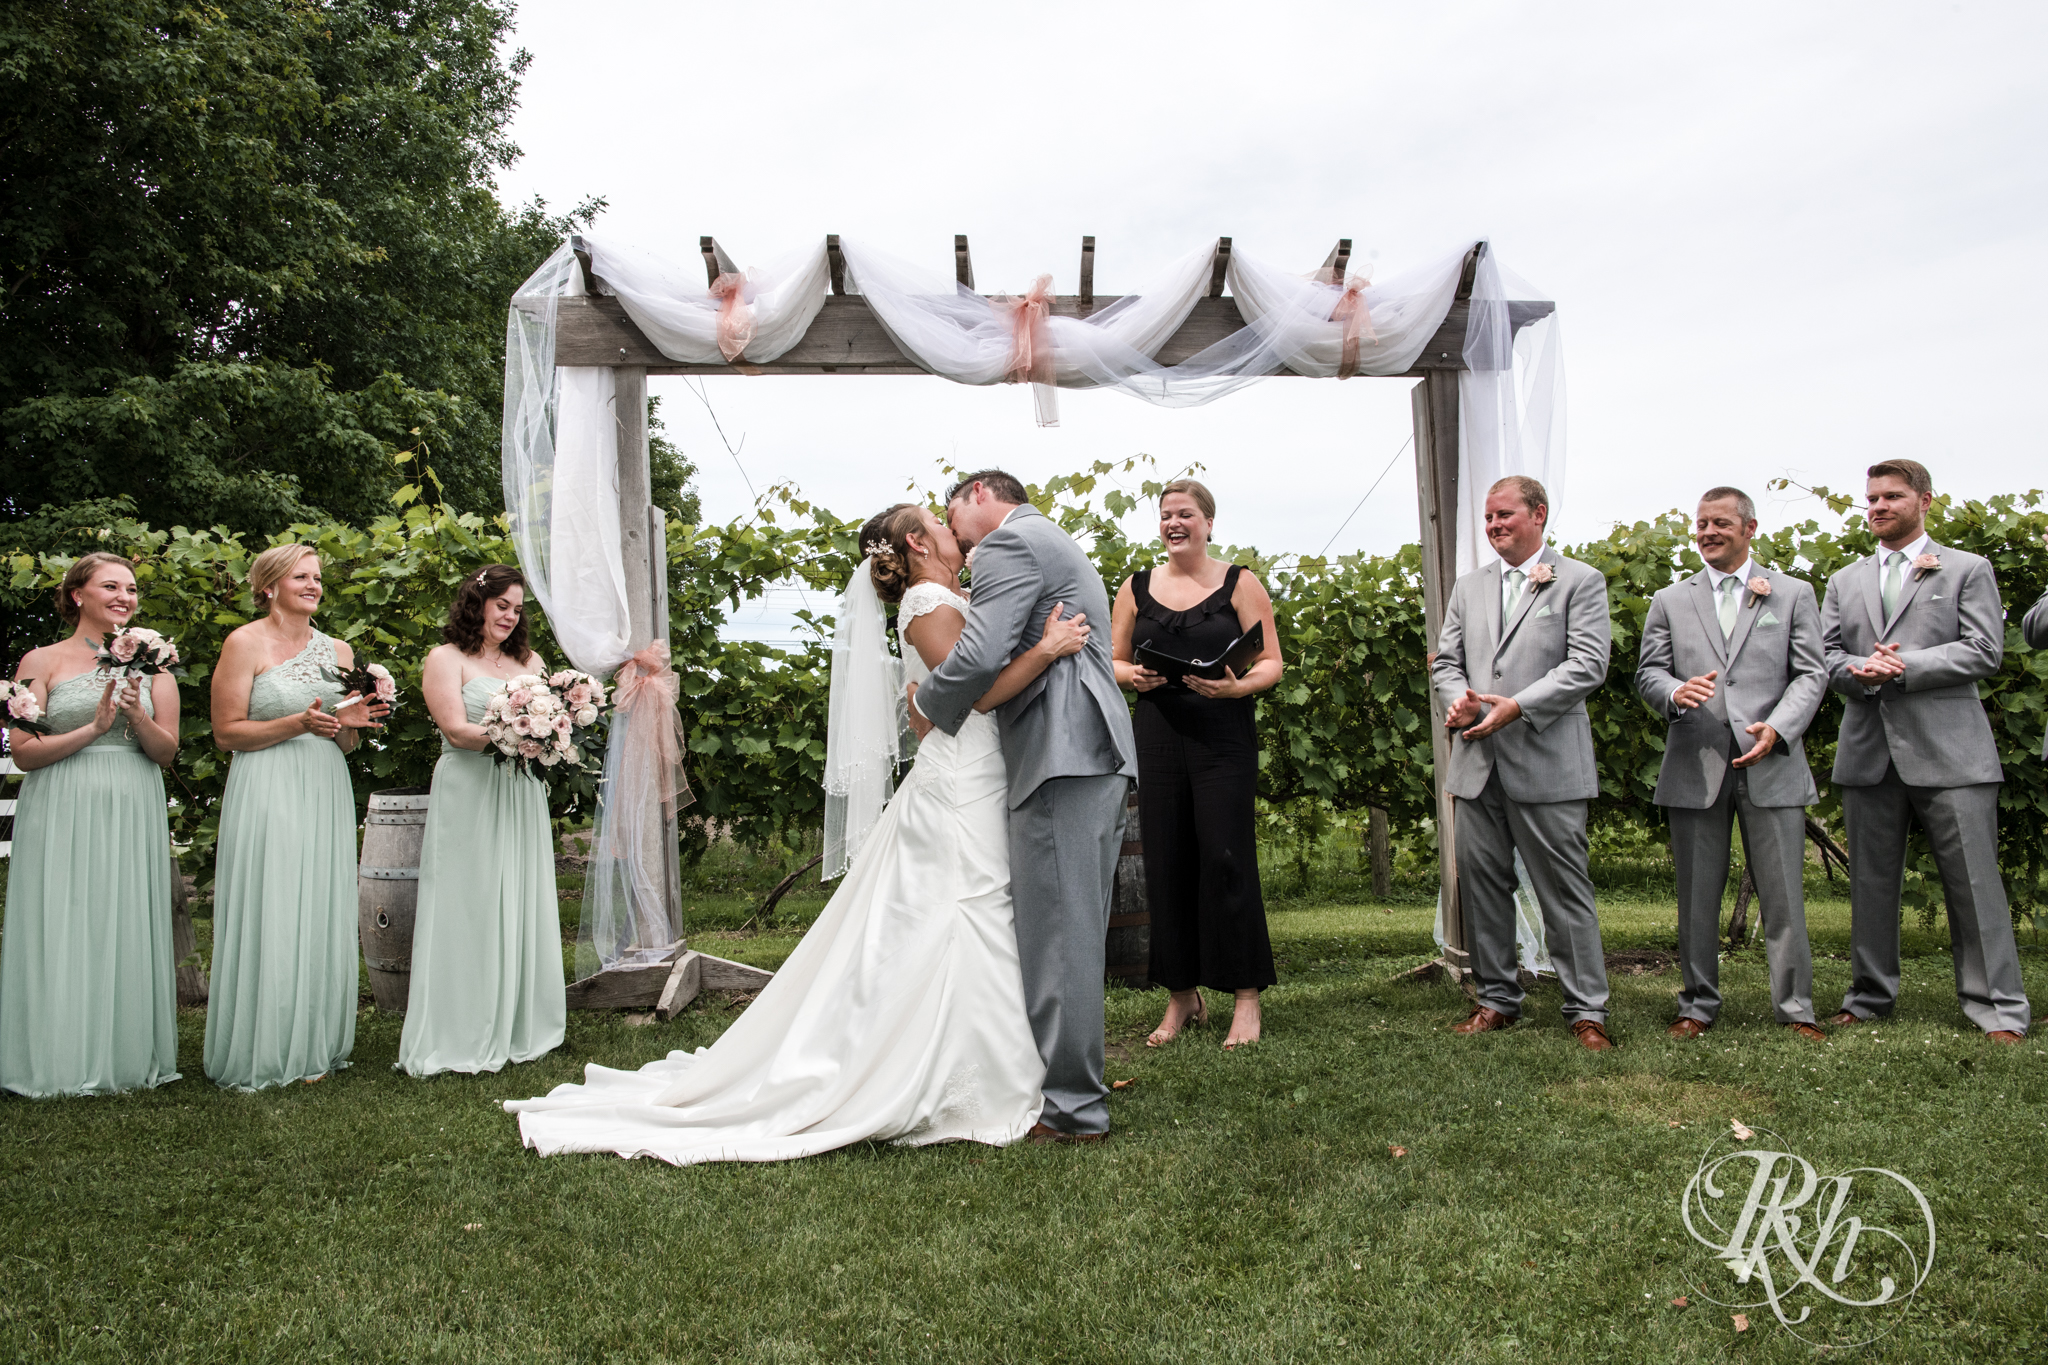 Bride and groom kissing during wedding ceremony at Next Chapter Winery in New Prague, Minnesota.